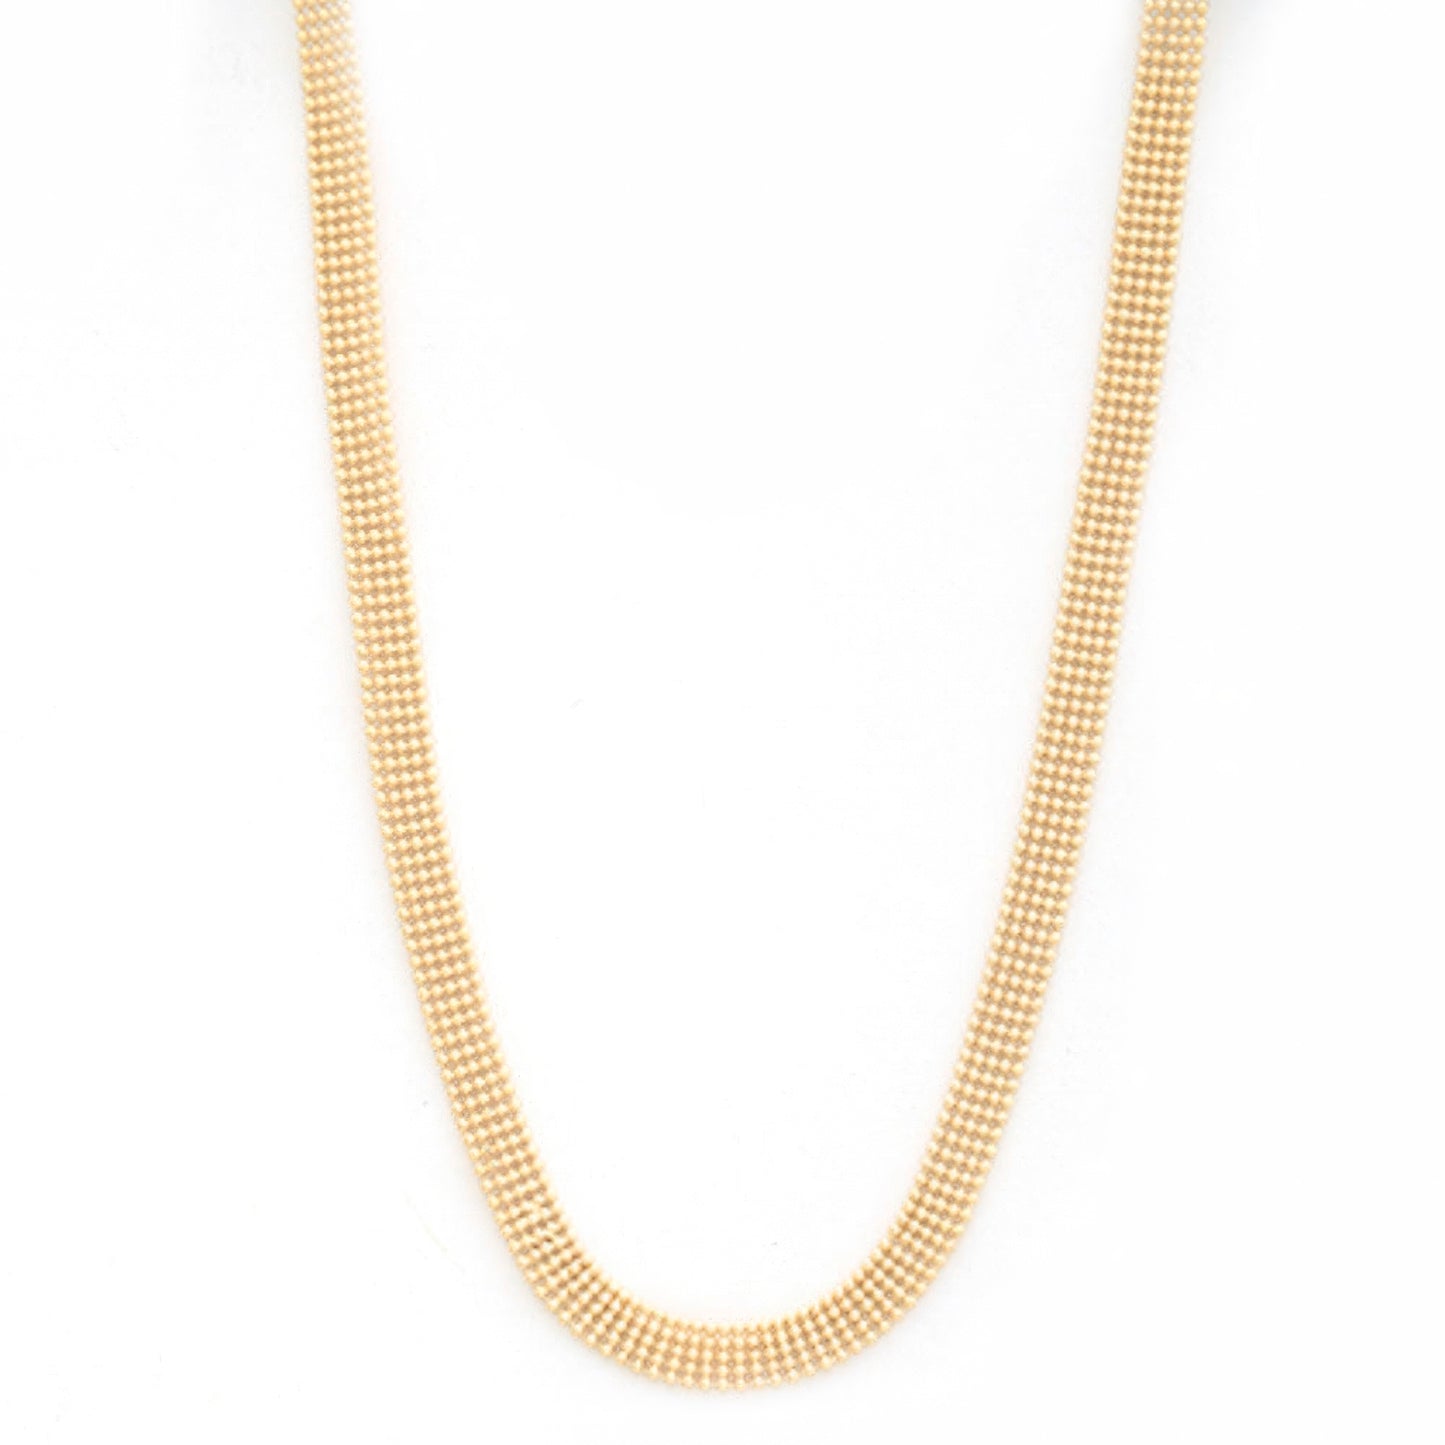 Sodajo Gold Dipped Brass Chain Necklace - Tigbuls Variety Fashion